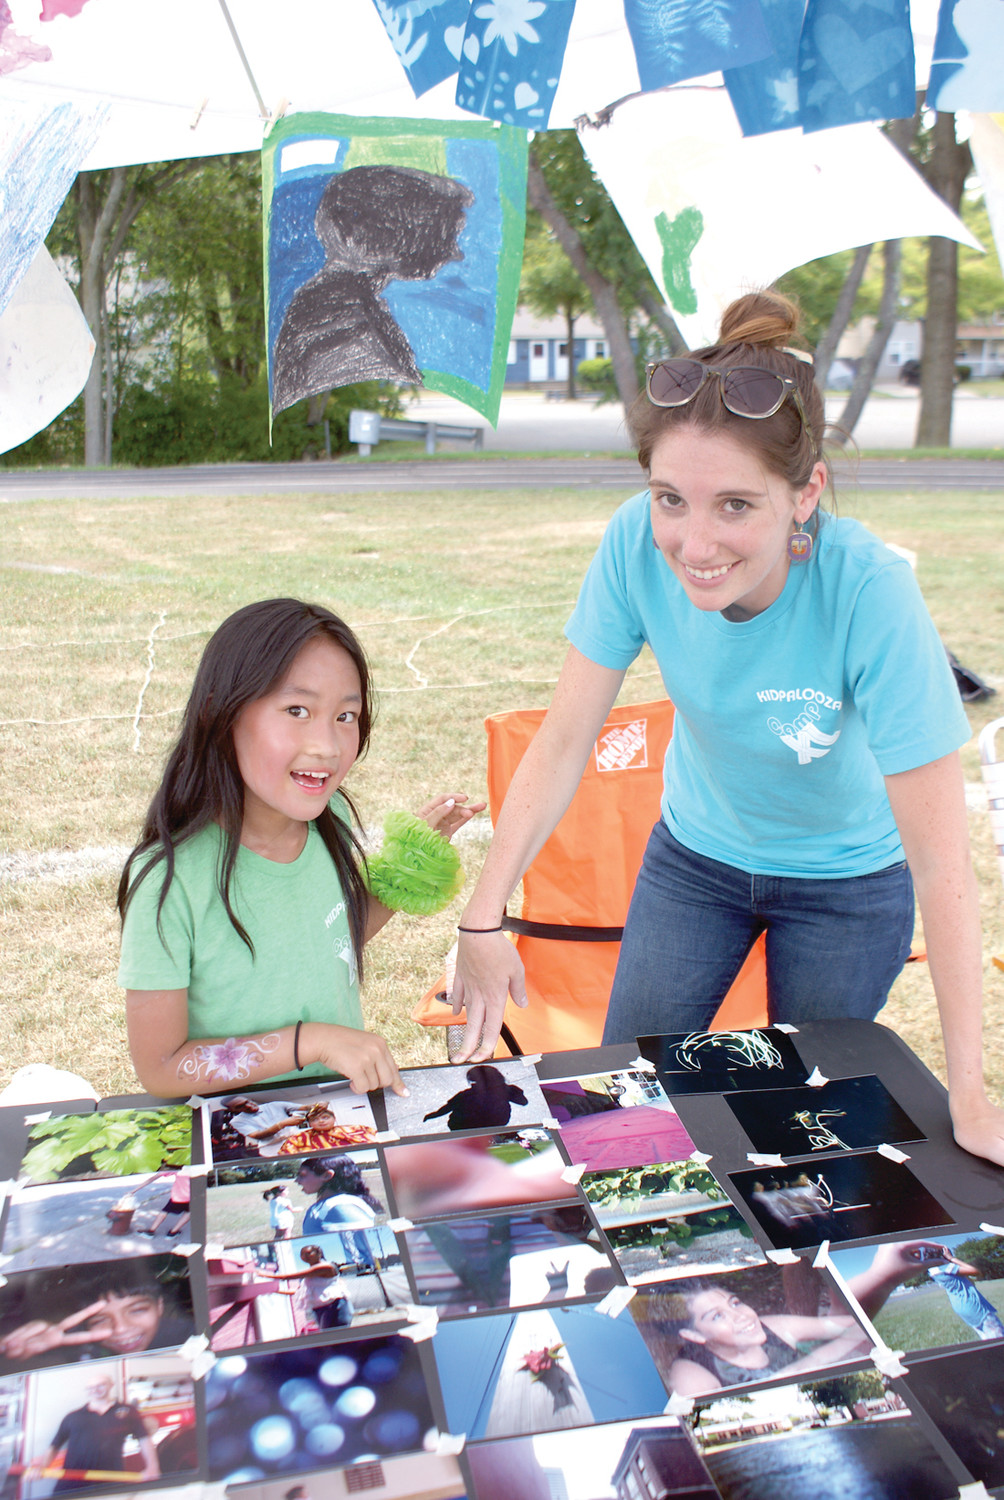 PHOTO GROUP: Amanda Chen, age 9, is pictured with her Photography Instructor from Camp XL, Alicia Turbitt. They highlighted photographs and silhouettes by camp members.